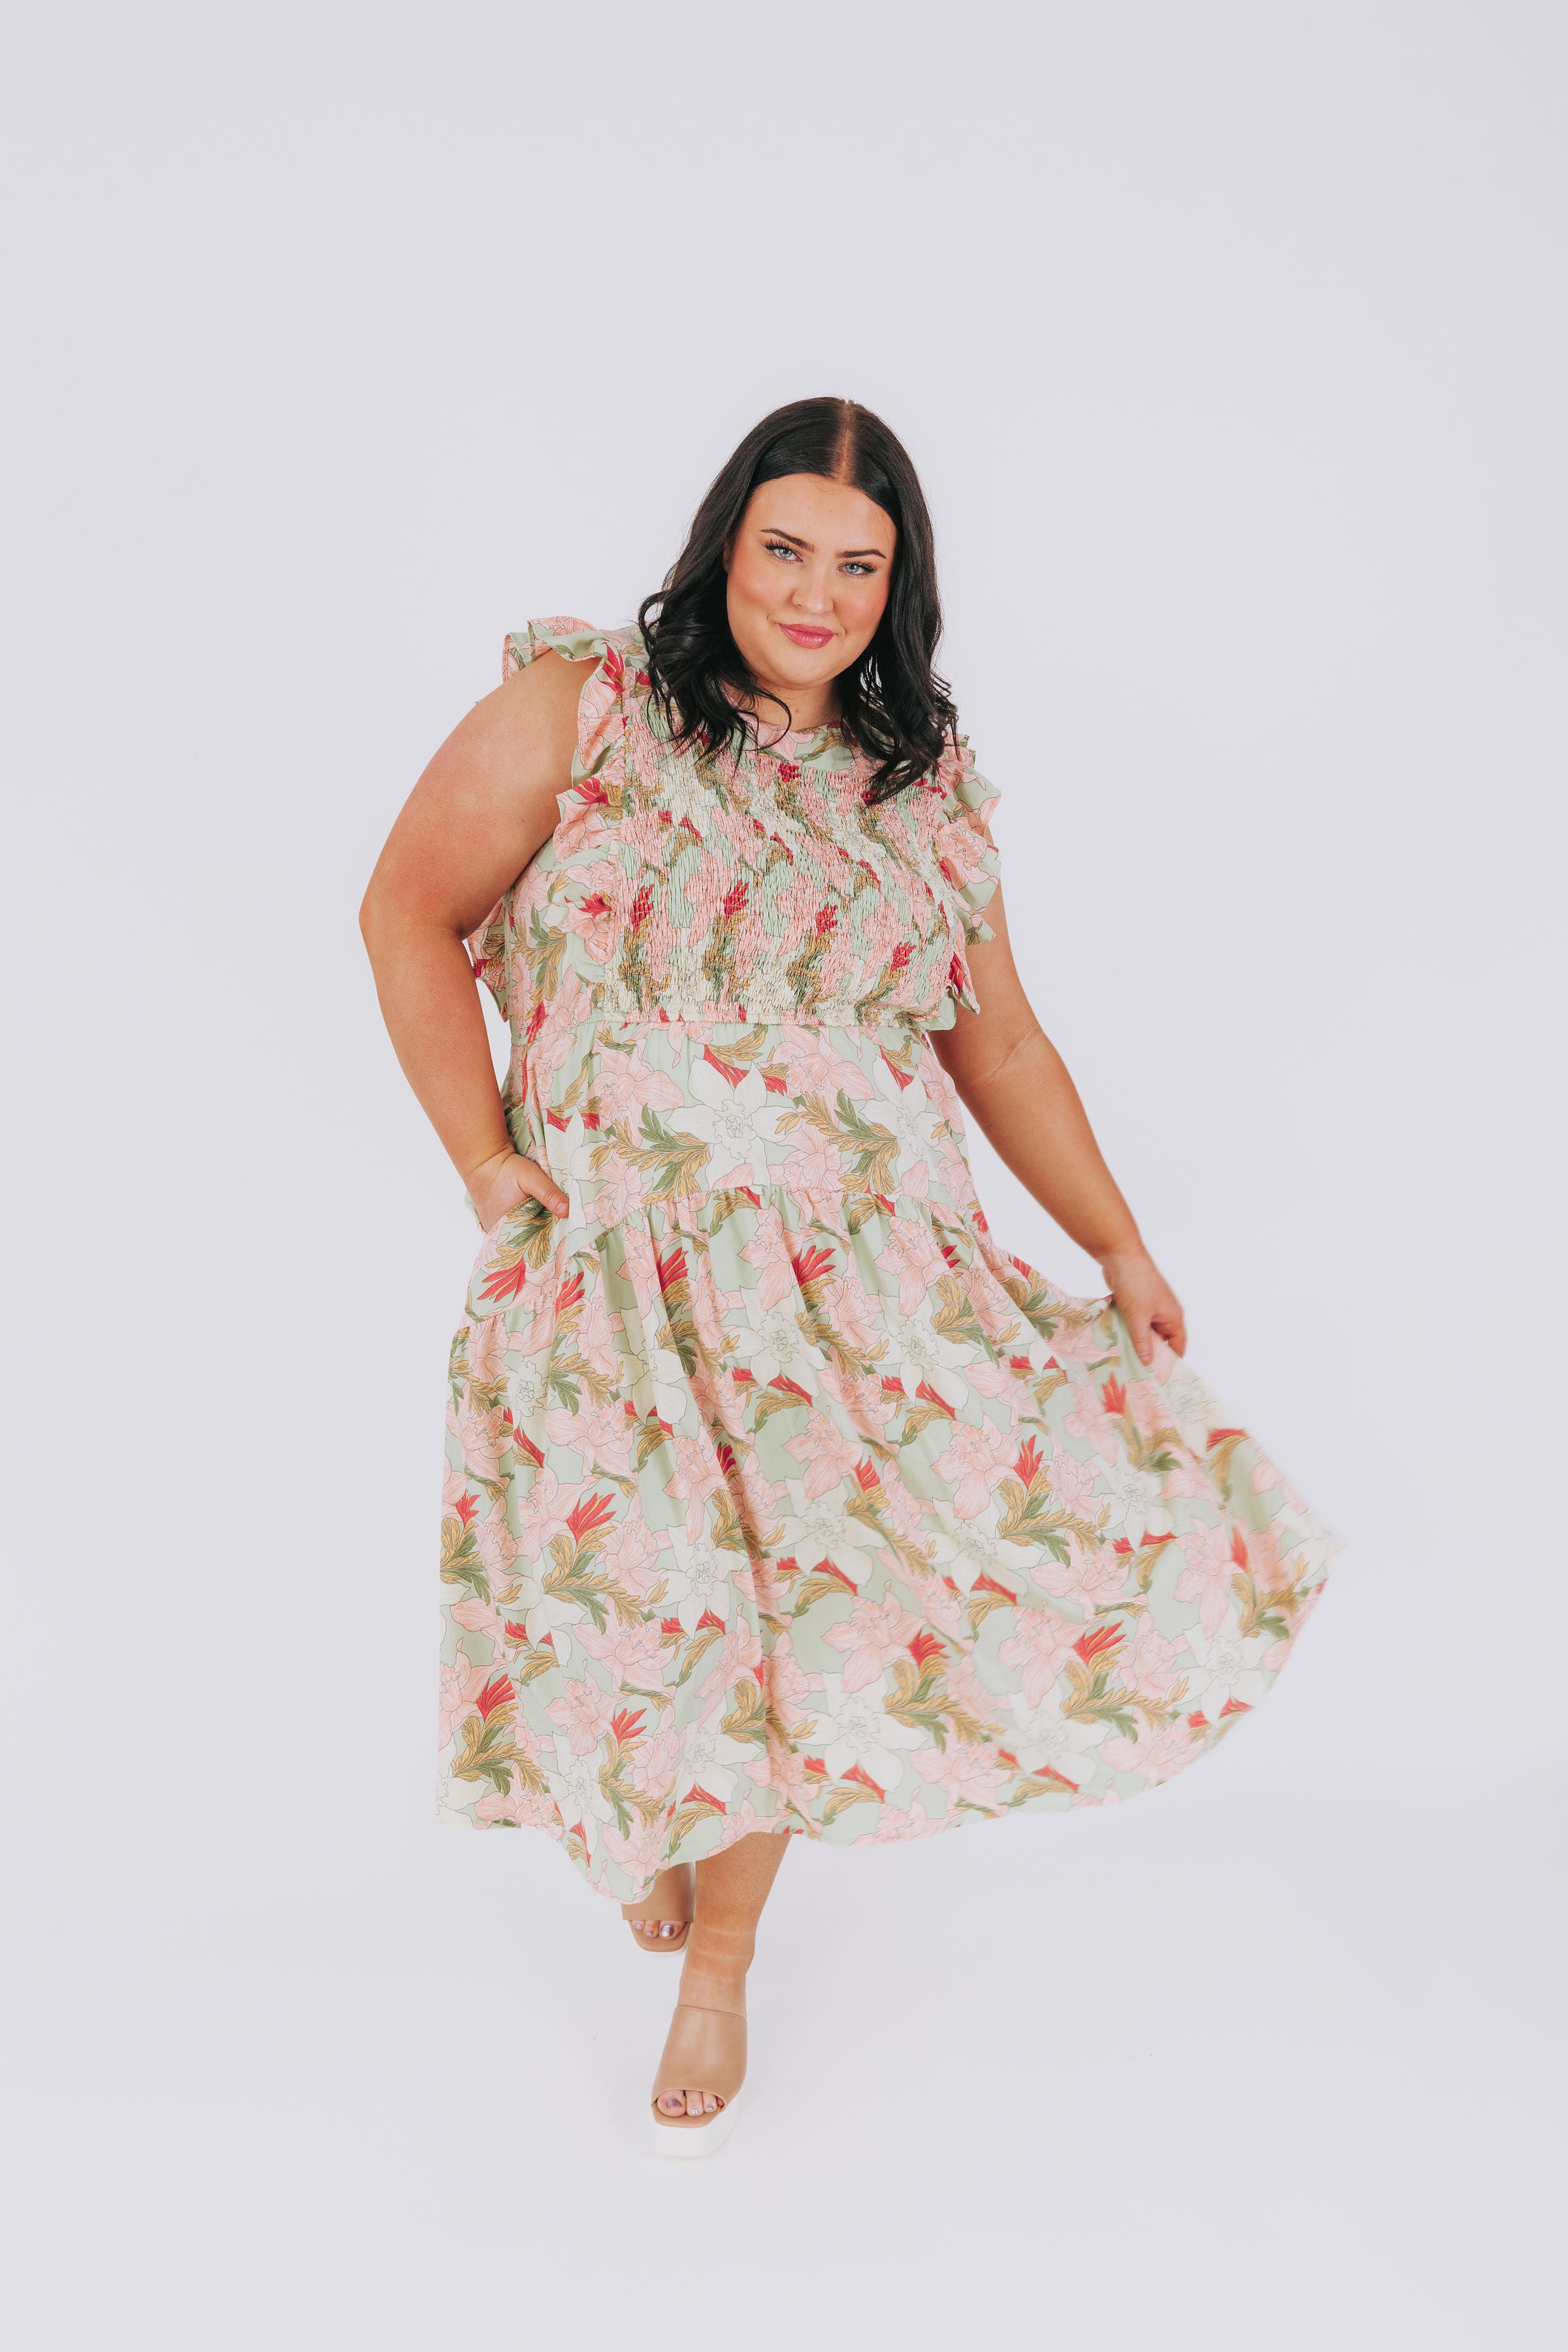 PLUS SIZE - Just A Memory Dress